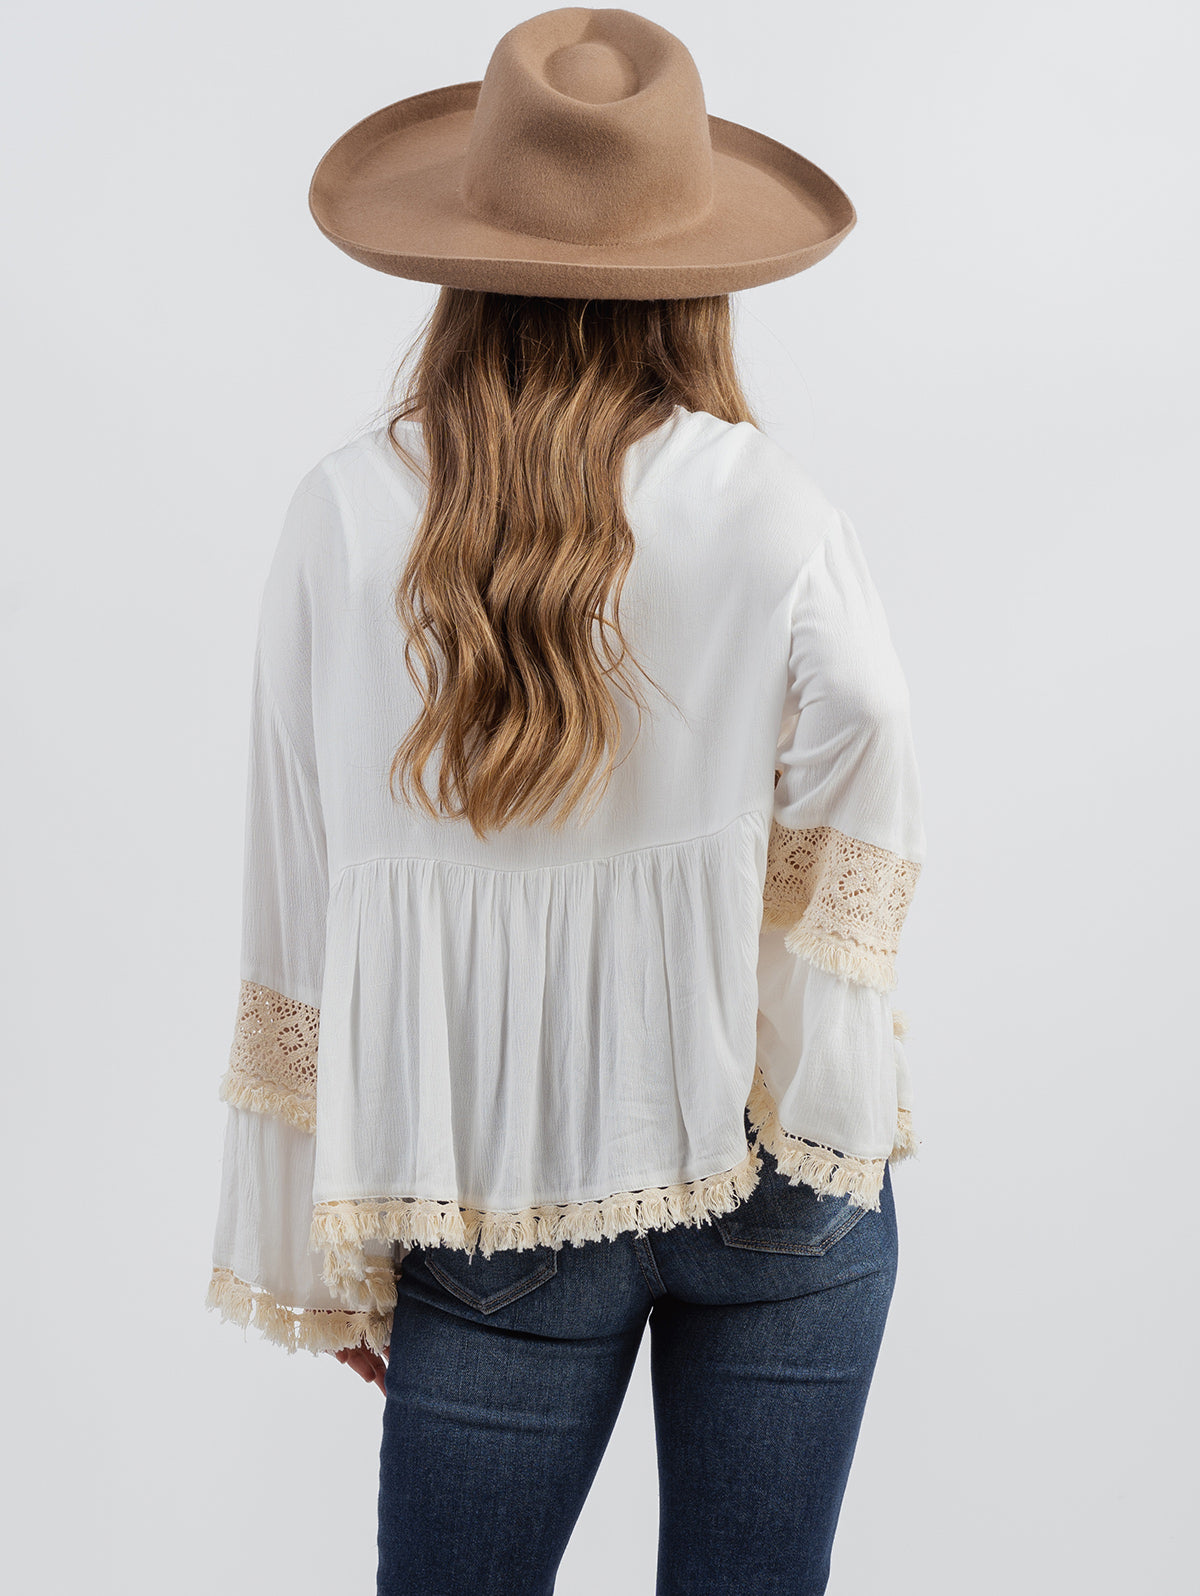 American Bling Women's Lace With Fringe Tie Neck Top - Cowgirl Wear